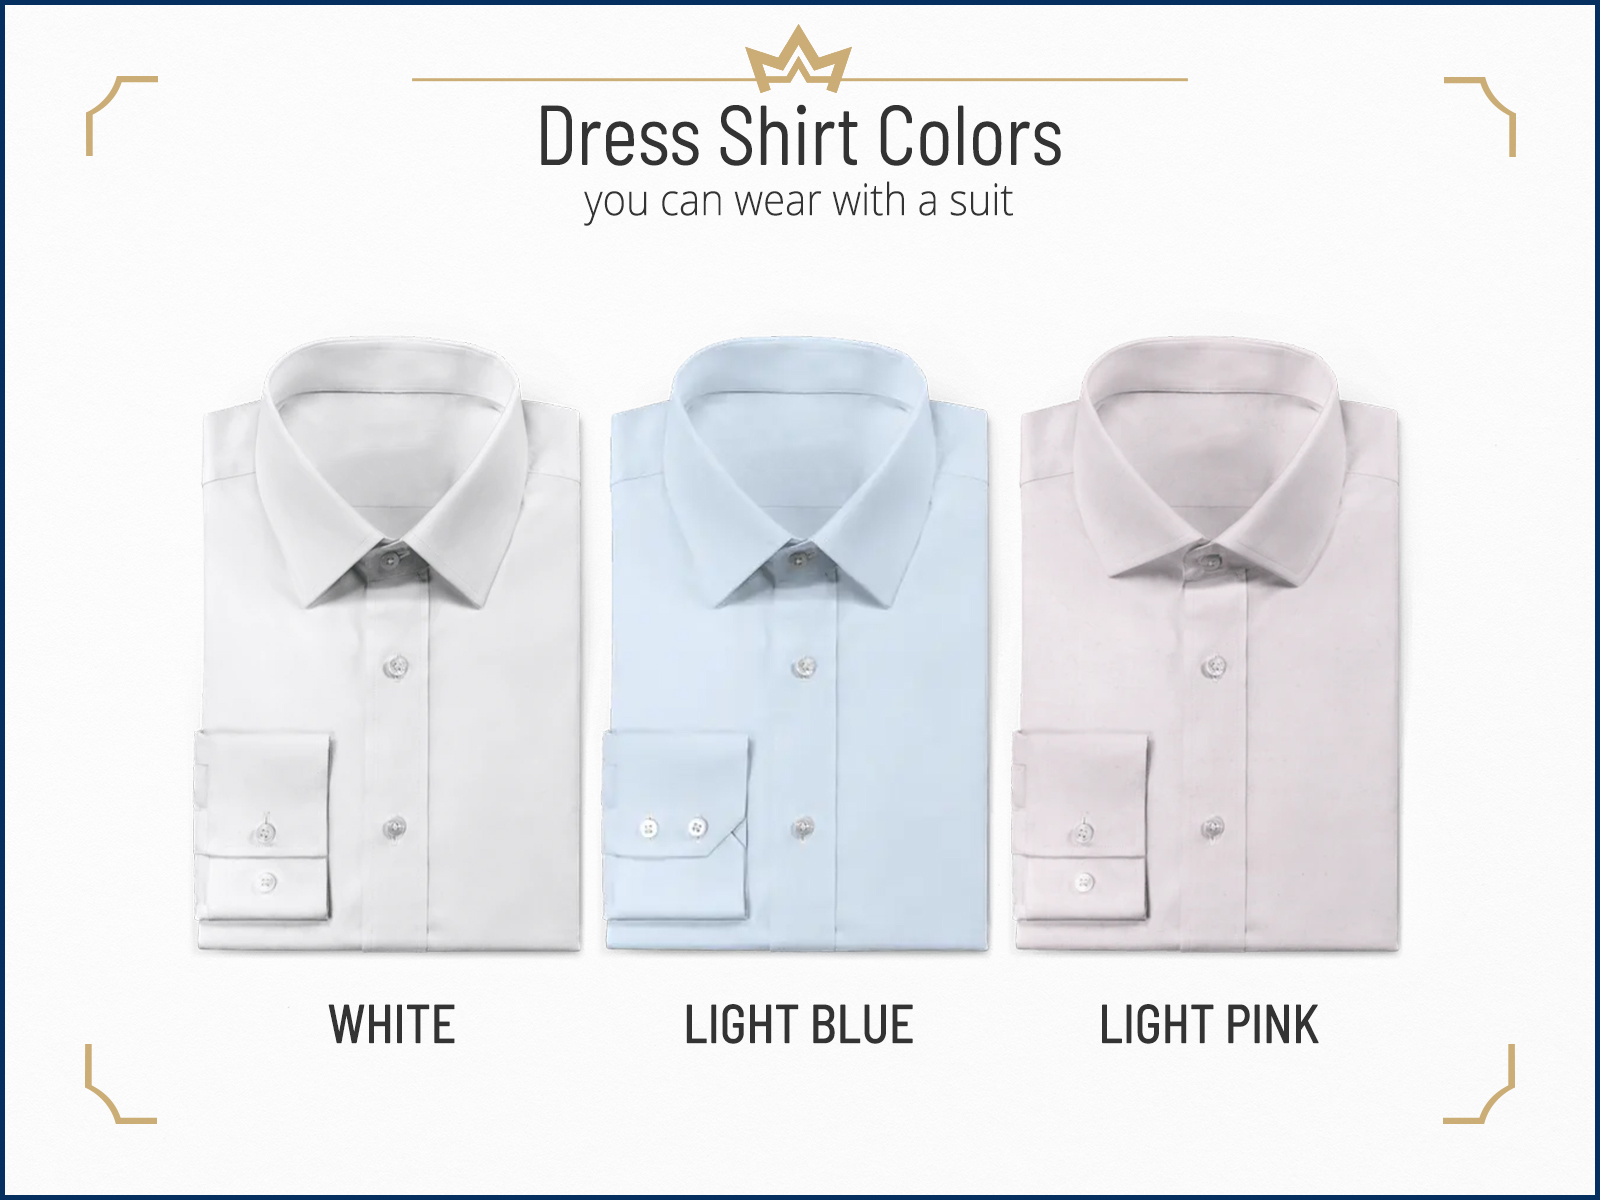 Solid dress shirt colors to wear with a suit